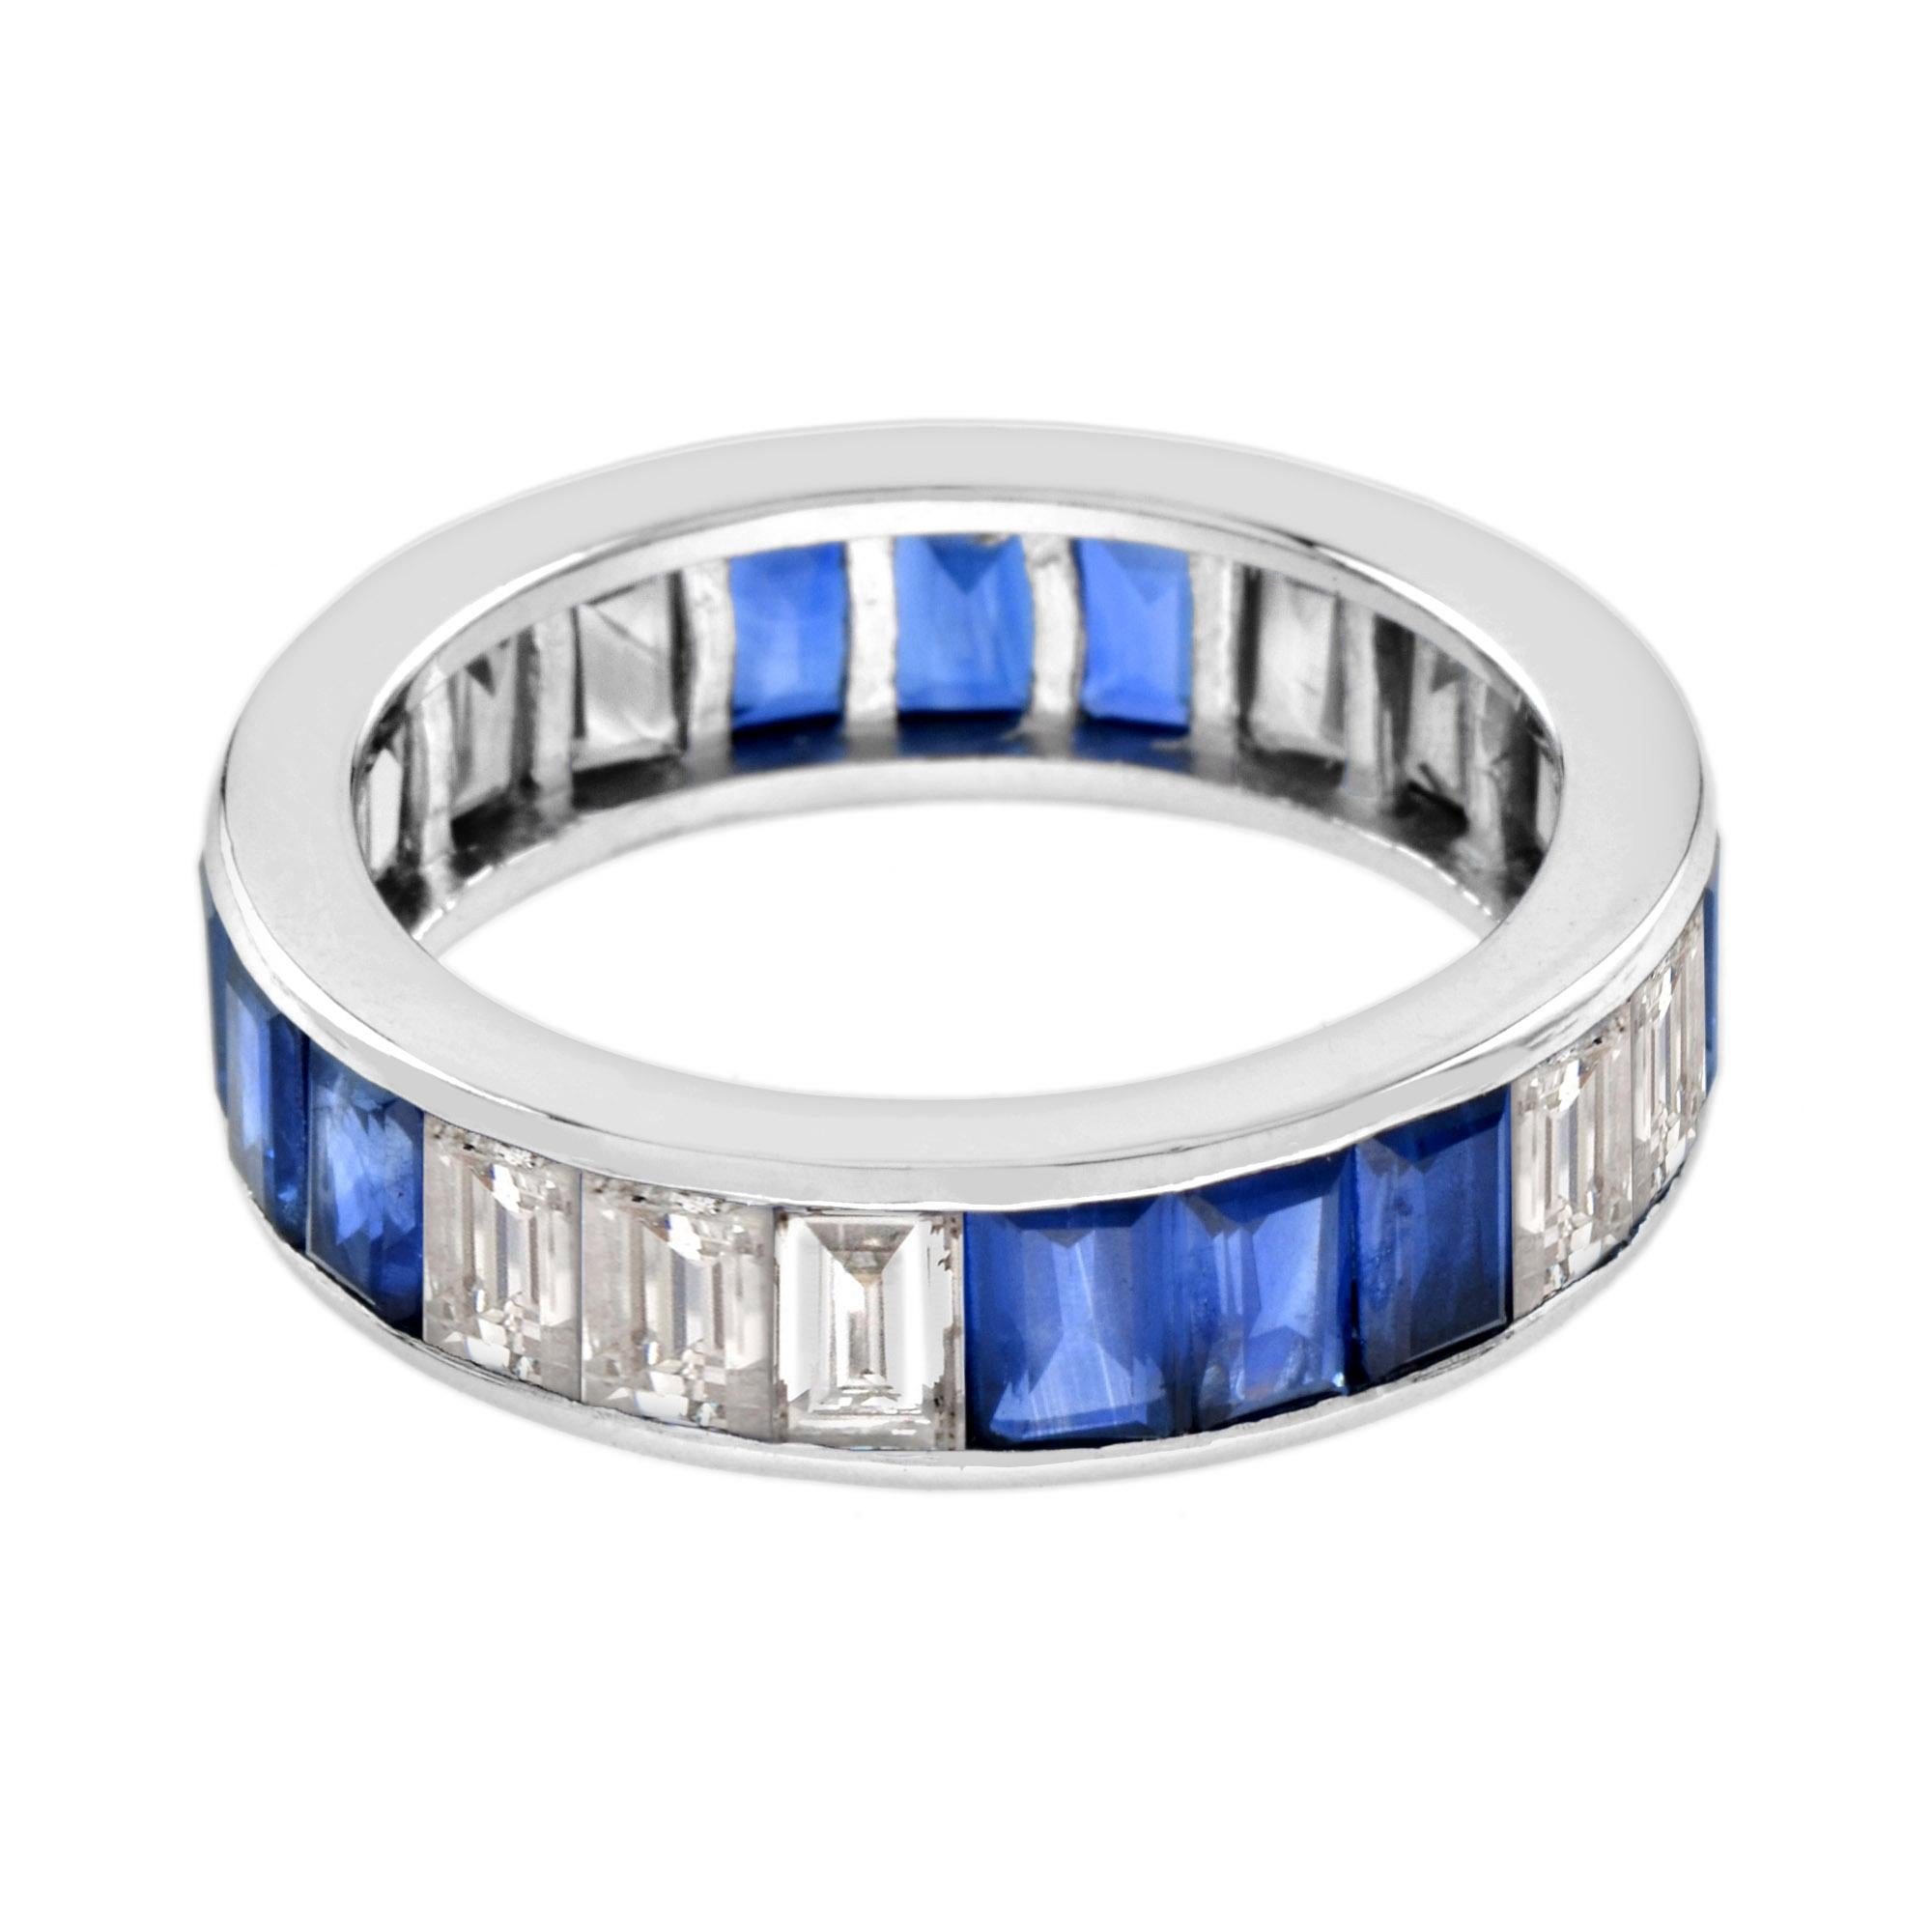 For Sale:  Seamless 3.3 Ct. Baguette Diamond and Blue Sapphire Band Ring in Platinum950 4